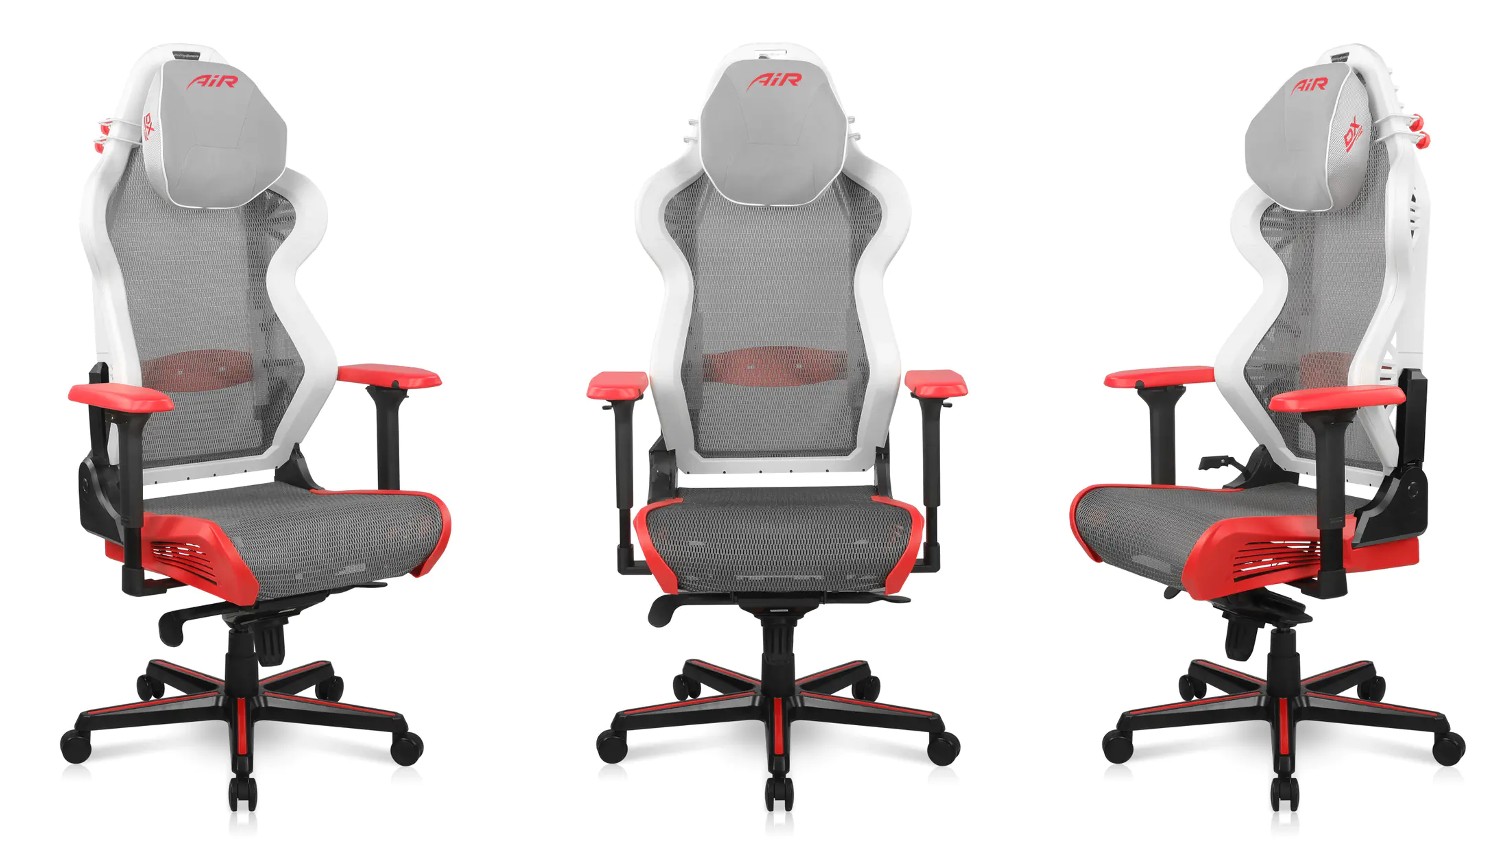 We're Giving Away A DXRacer Air Gaming Chair On Our Forums thumbnail